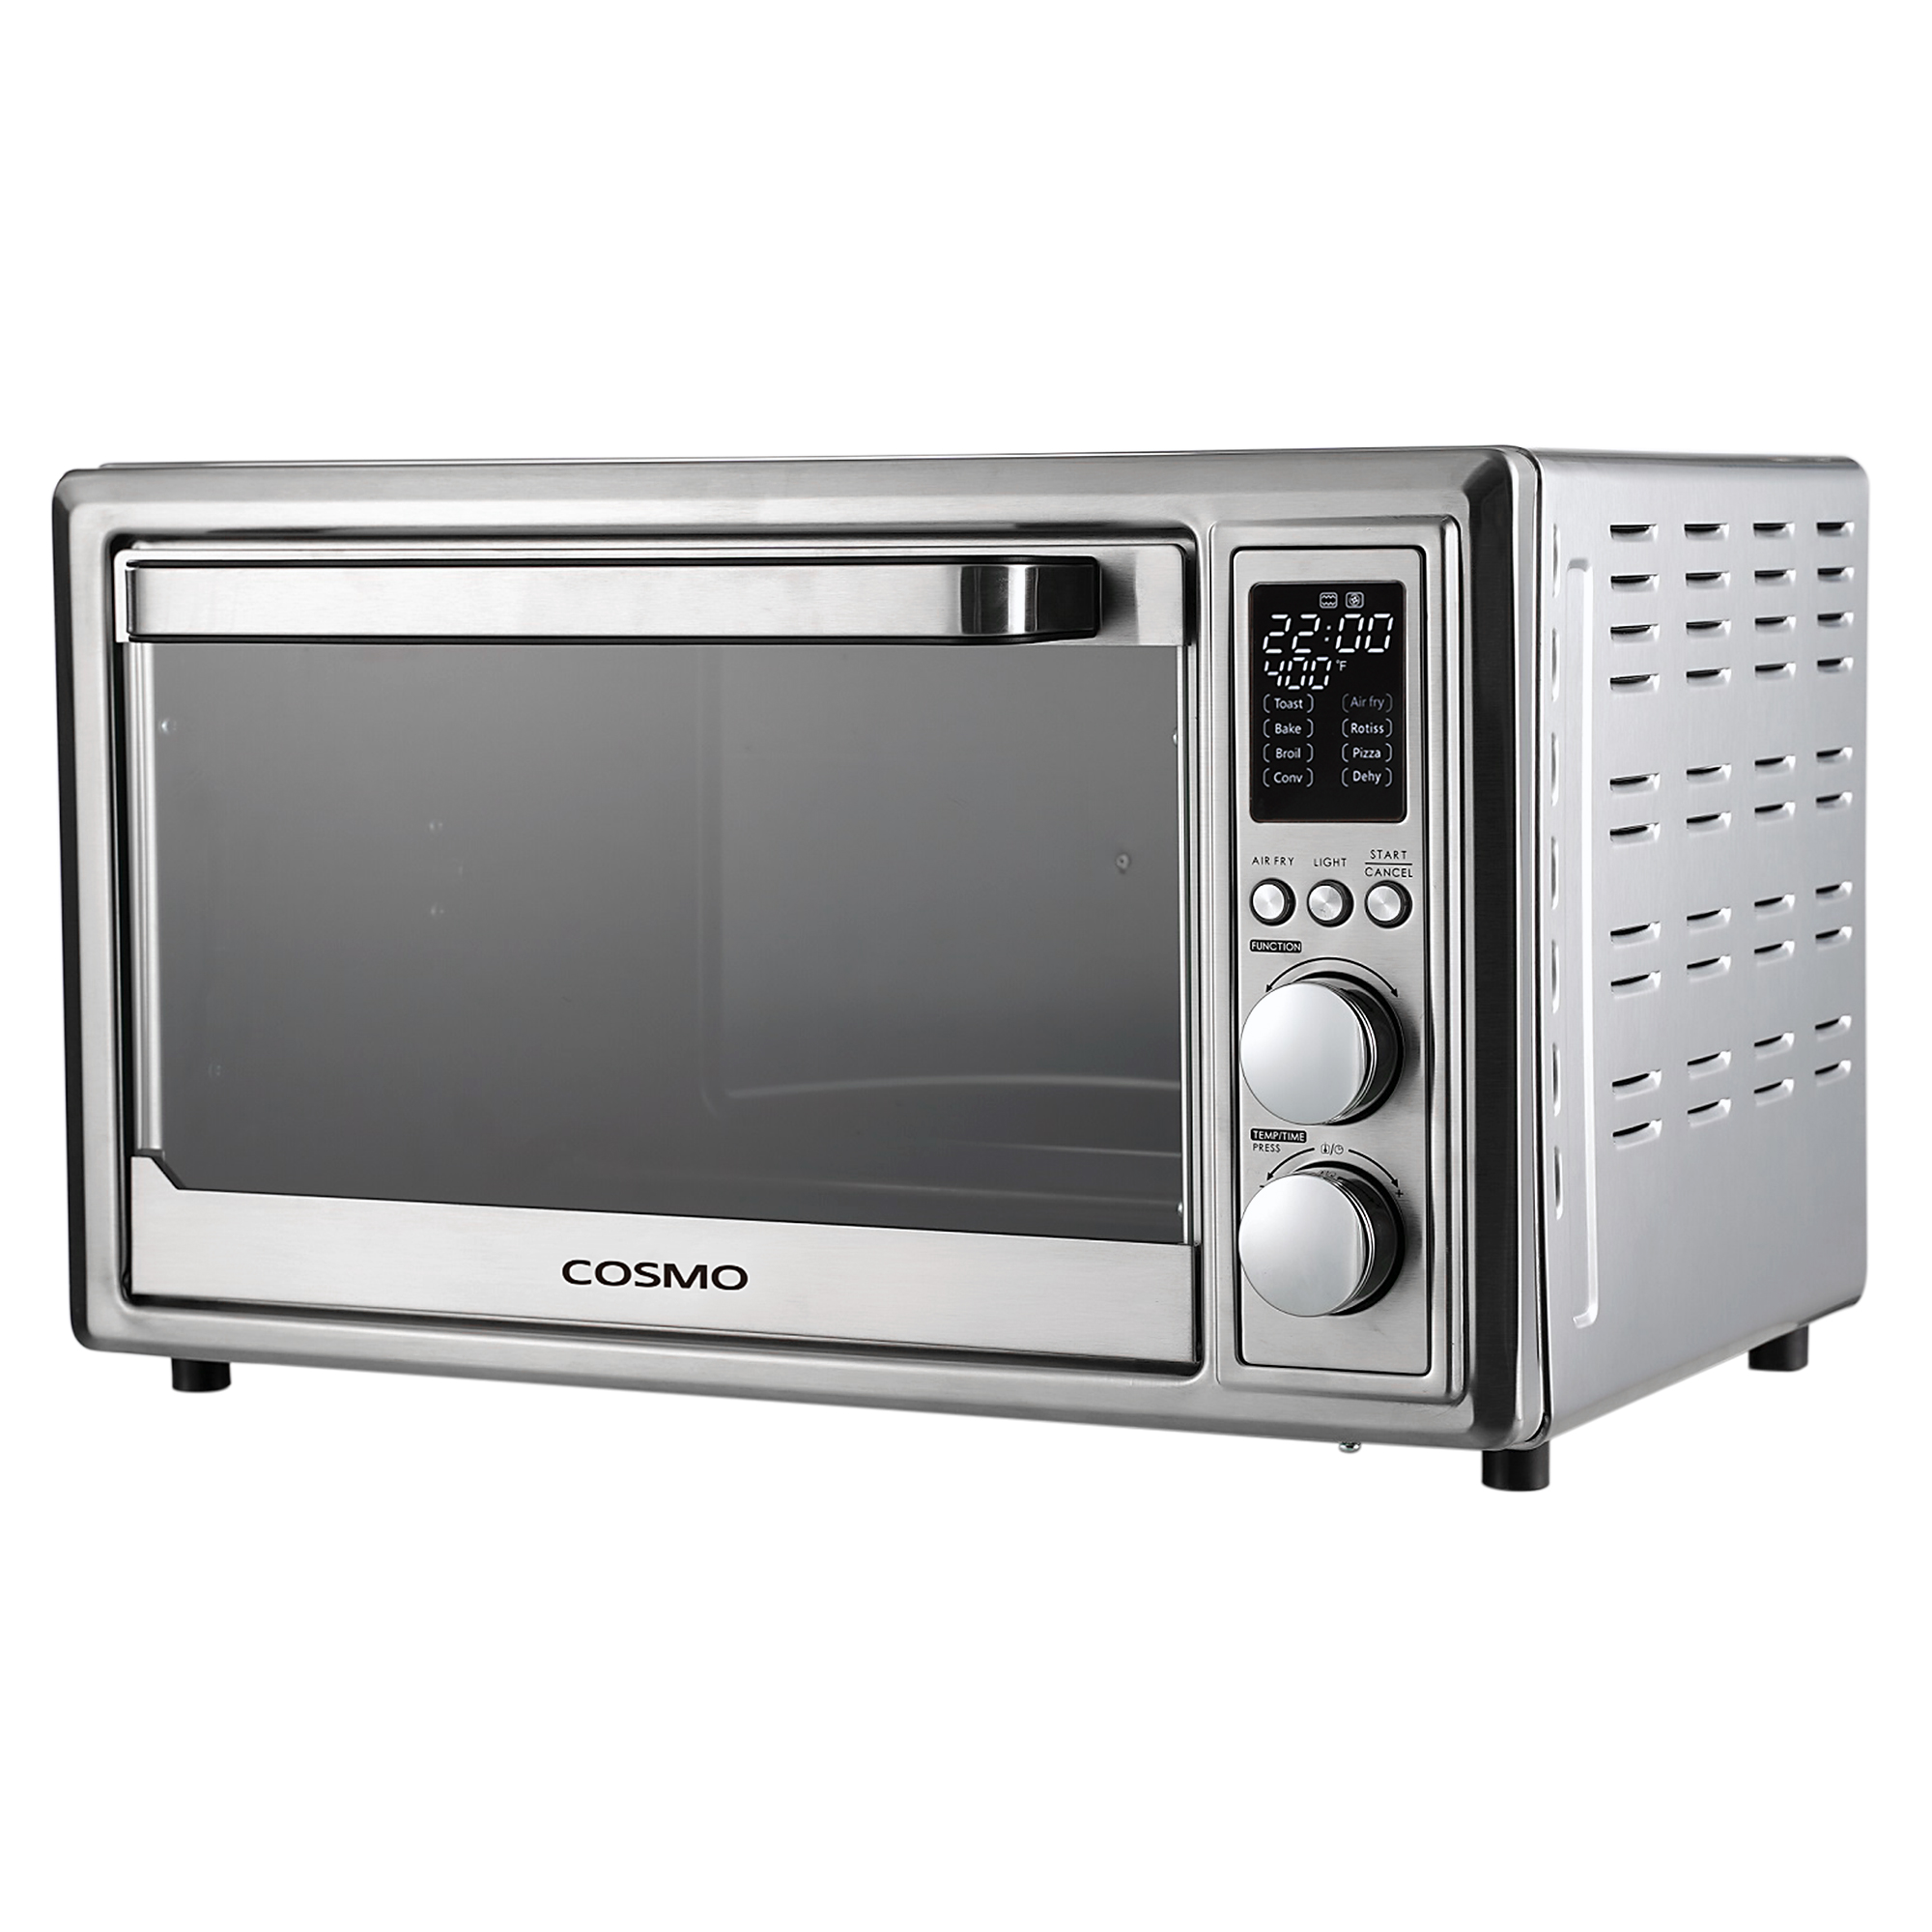 Fryer Oven ,32QT X-Large Air Fryer Toaster Oven Stainless Steel